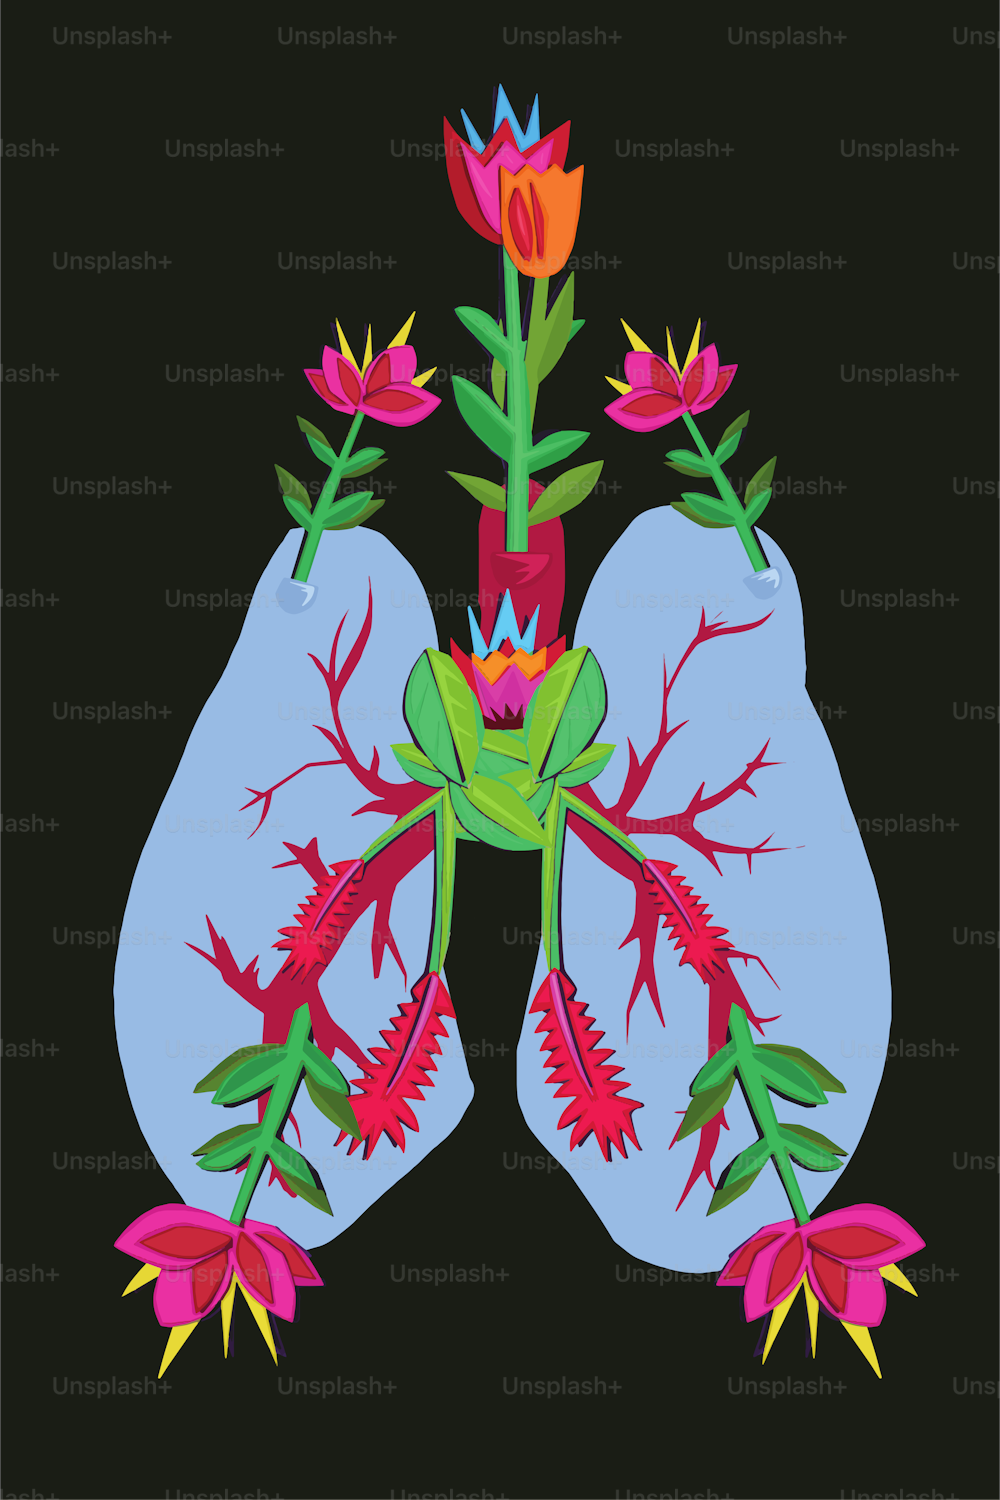 Human lungs and flowers in paper art style